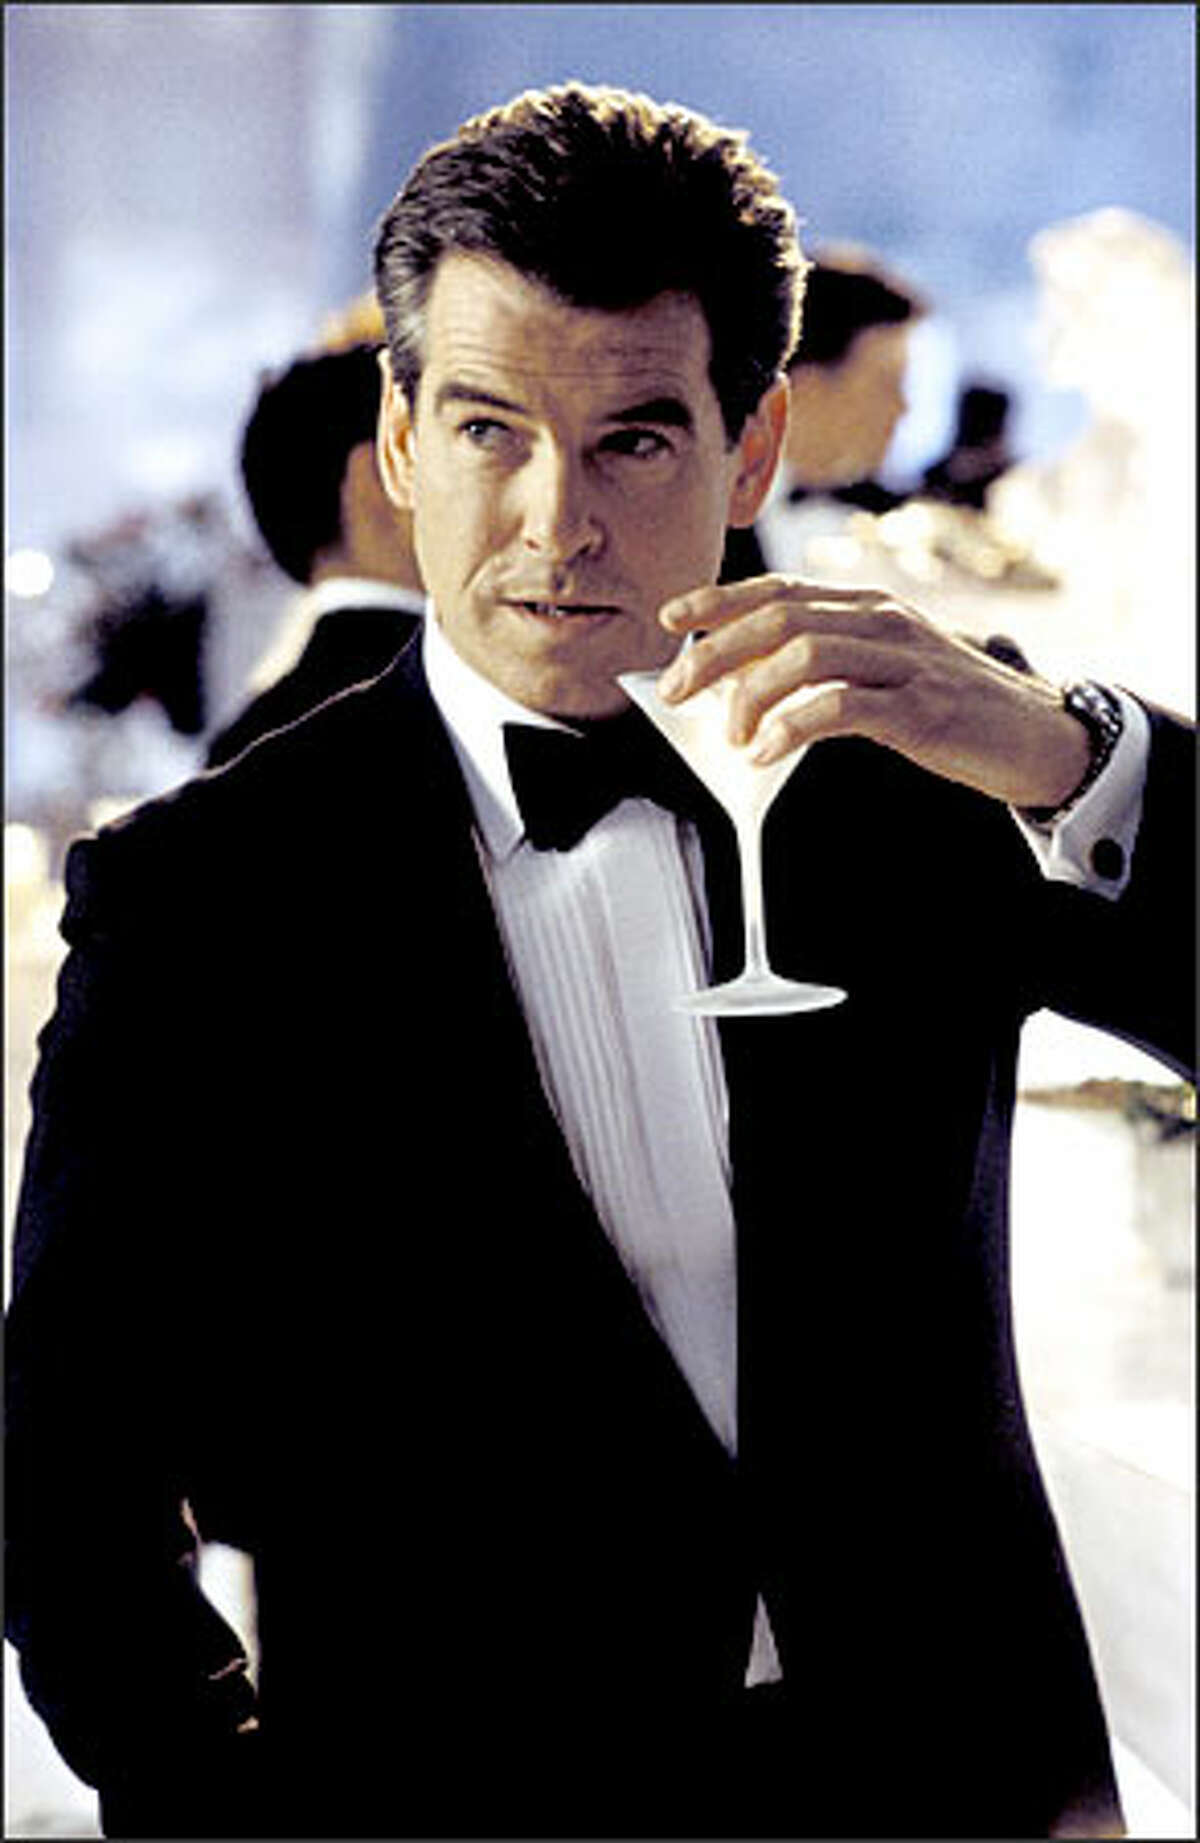 Pierce Brosnan stars as James Bond in MGM Die Another Day.